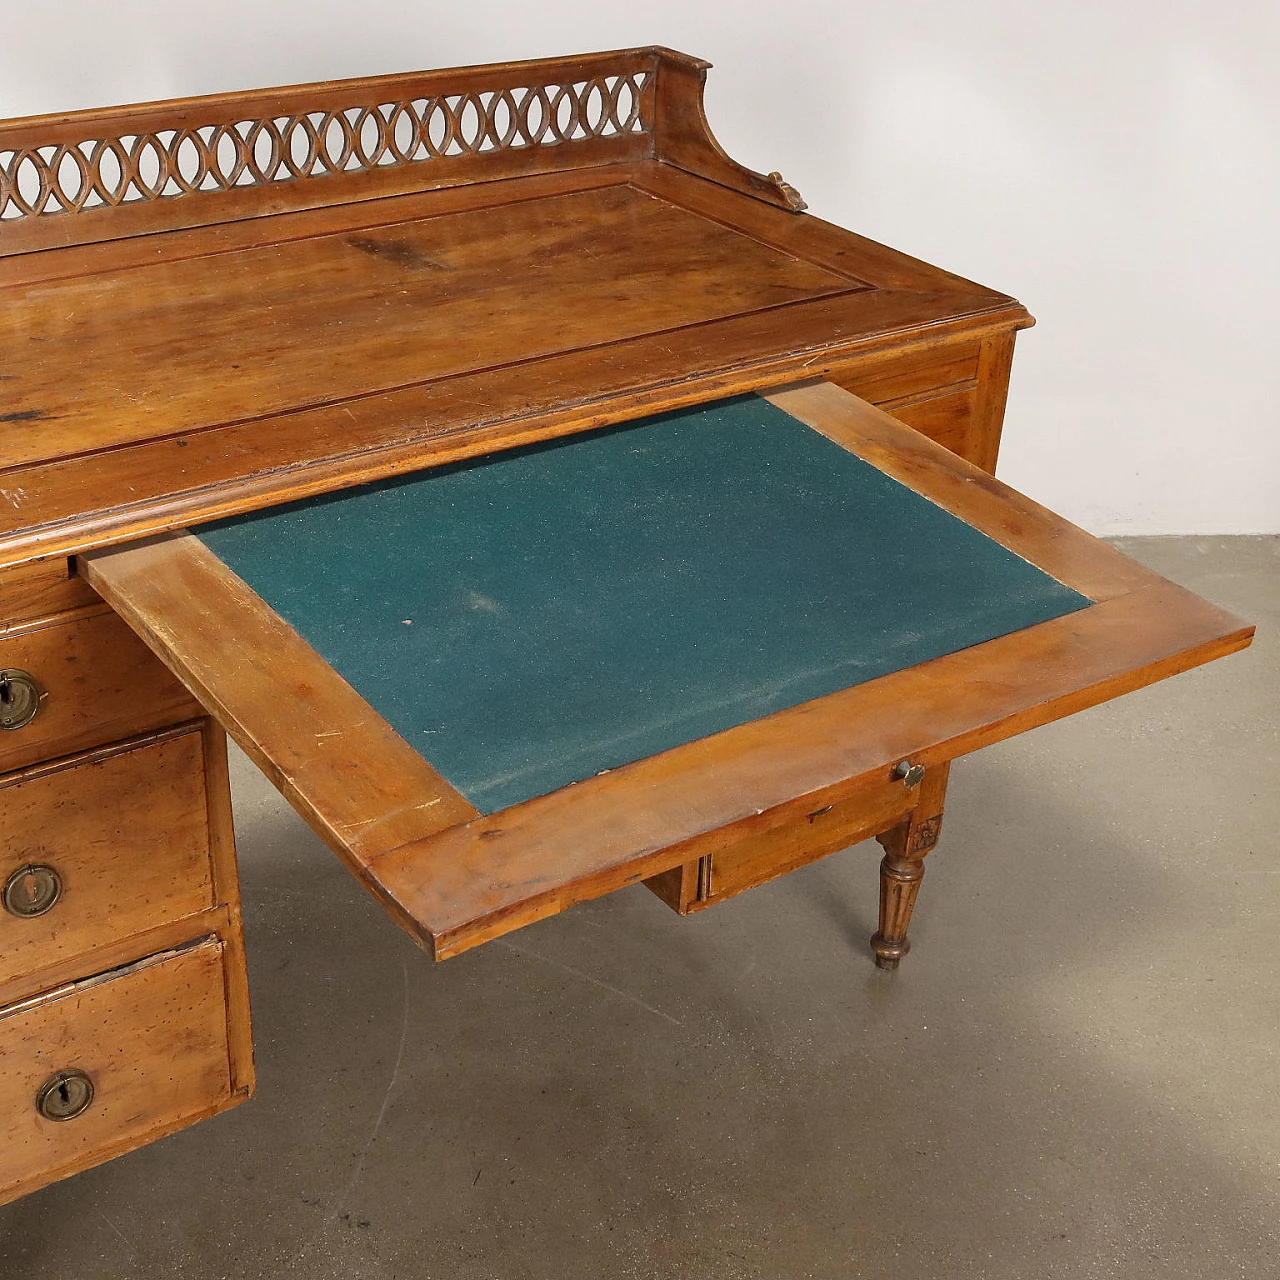 Walnut and fir desk with truncated cone legs, 19th century 3